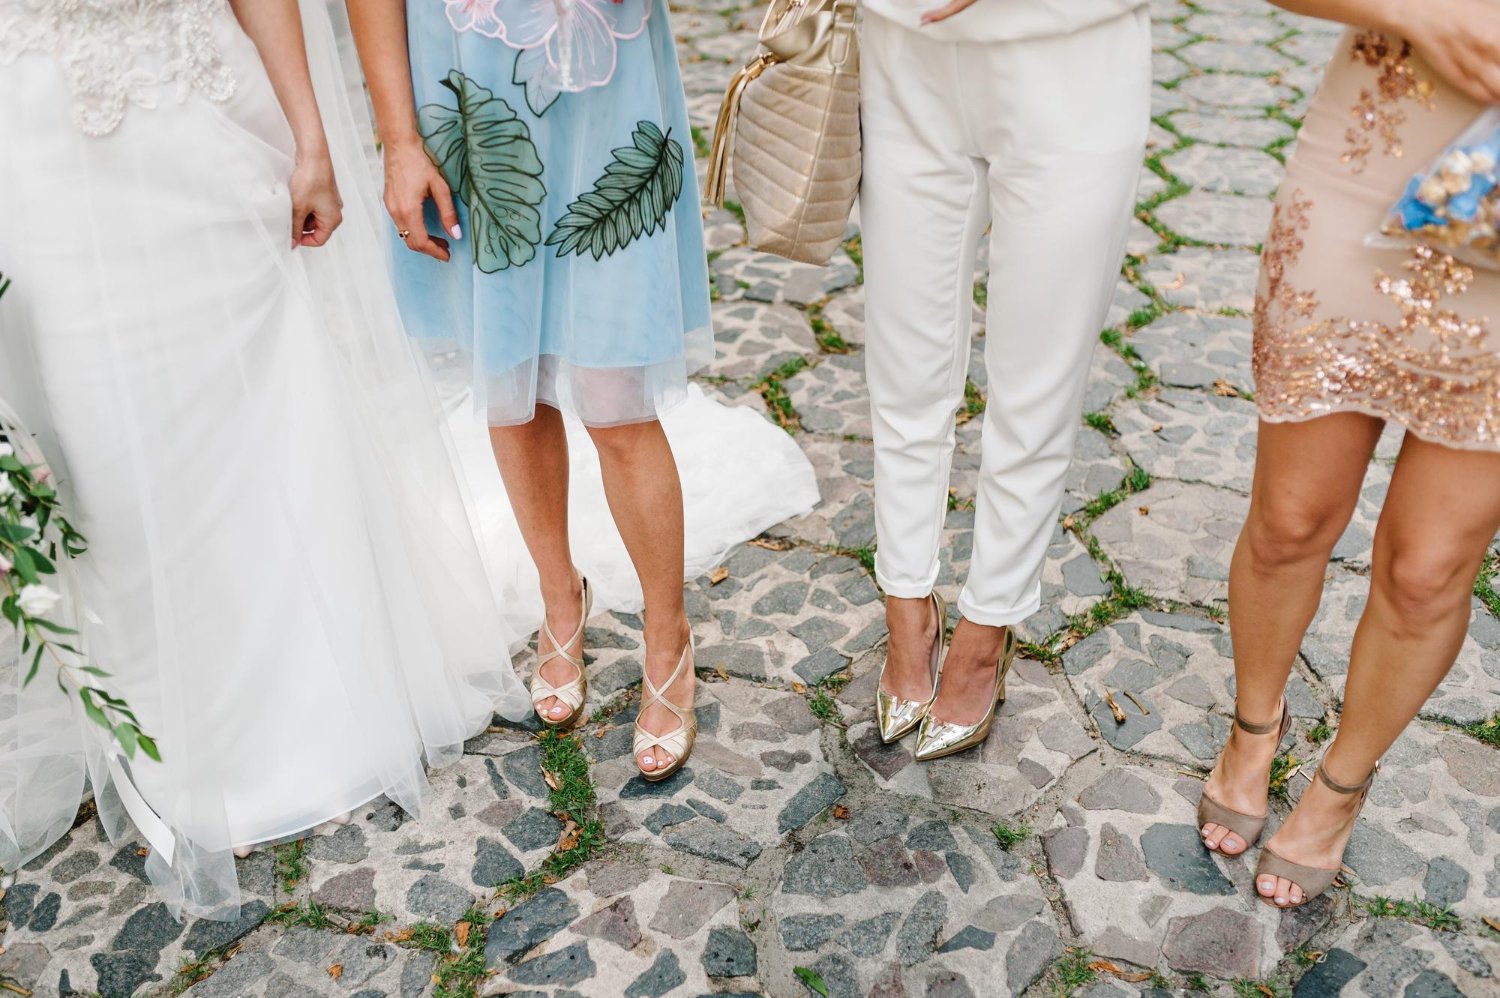 bride and bridesmaids show off their shoes at wedding hen party bride in white dress